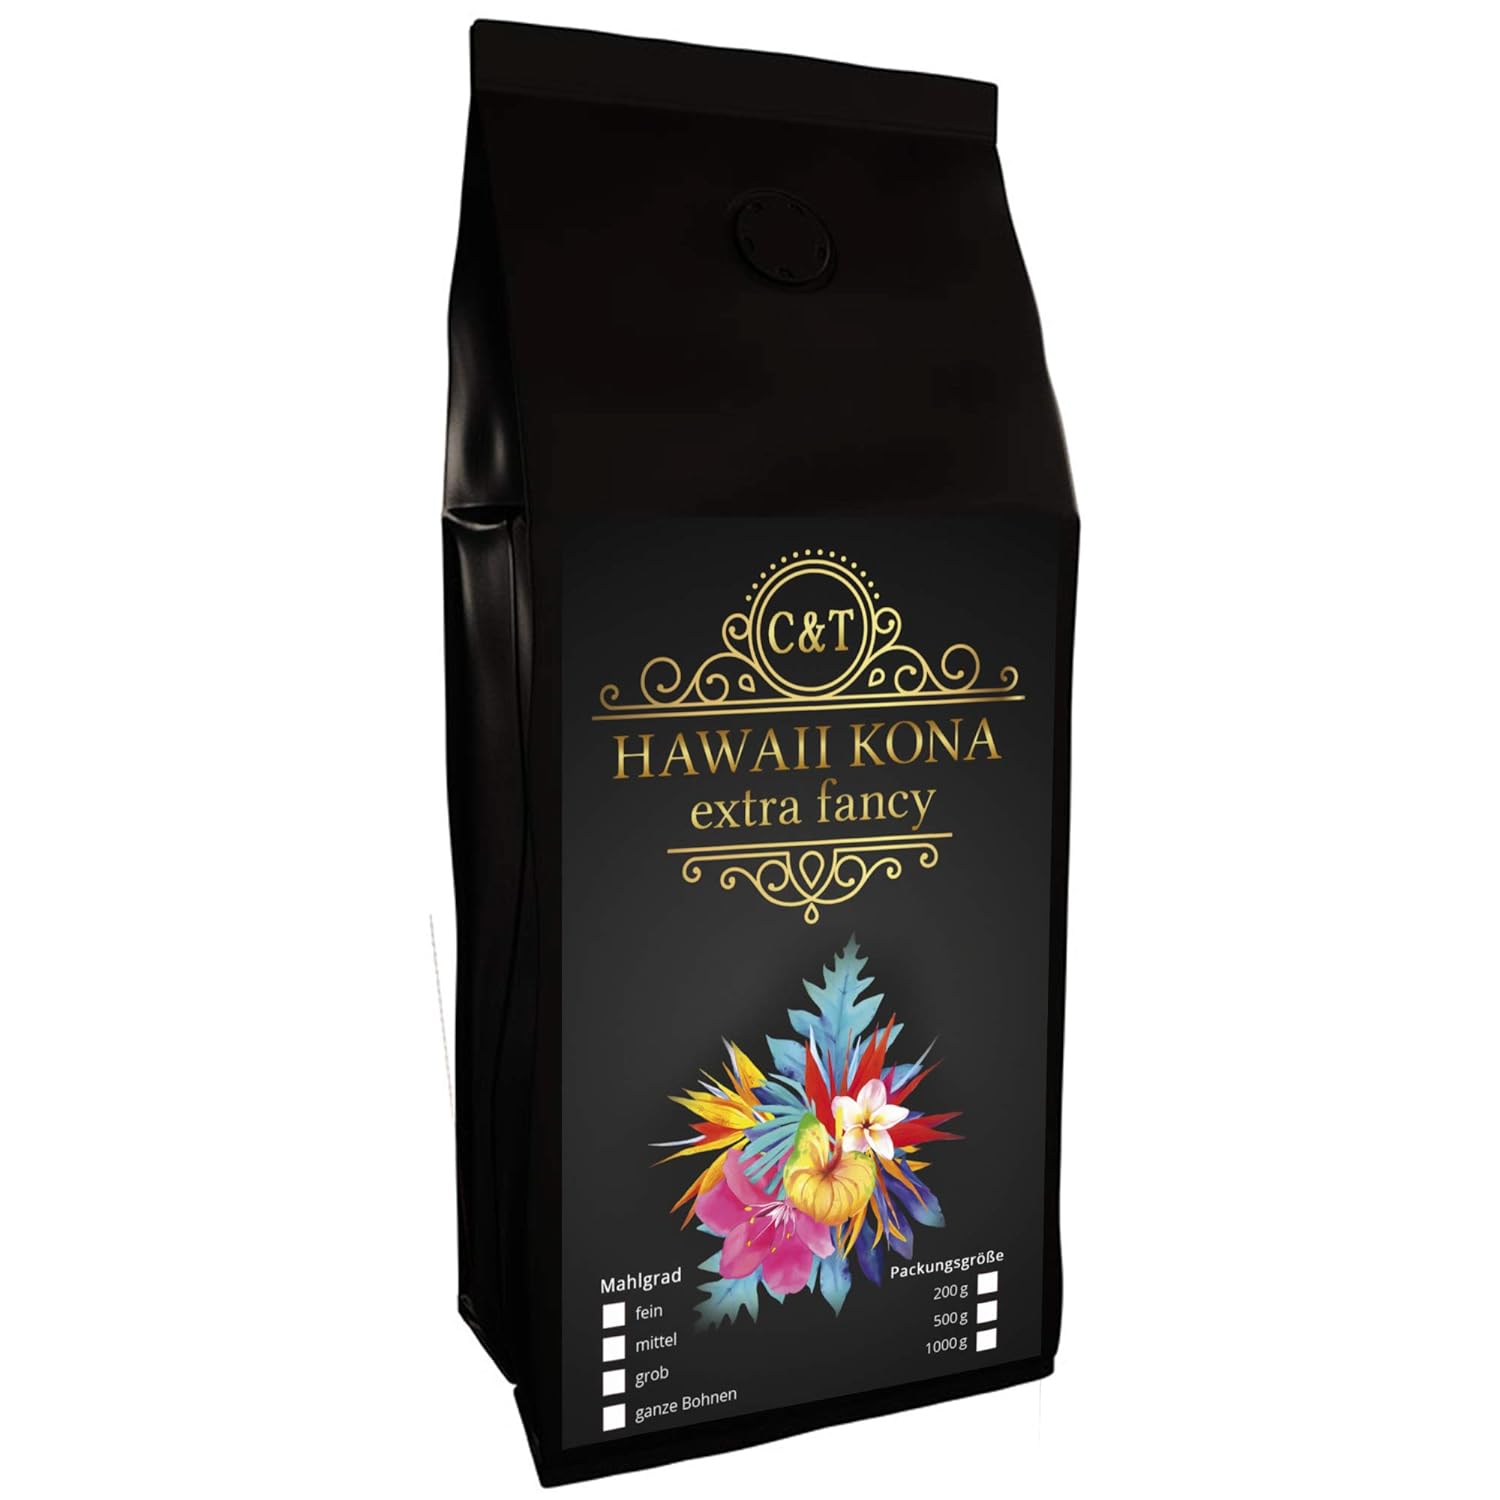 Hawaii Kona coffee | 1000g entire beans | The brown gold from Hawaii - one of the best coffees in the world ...